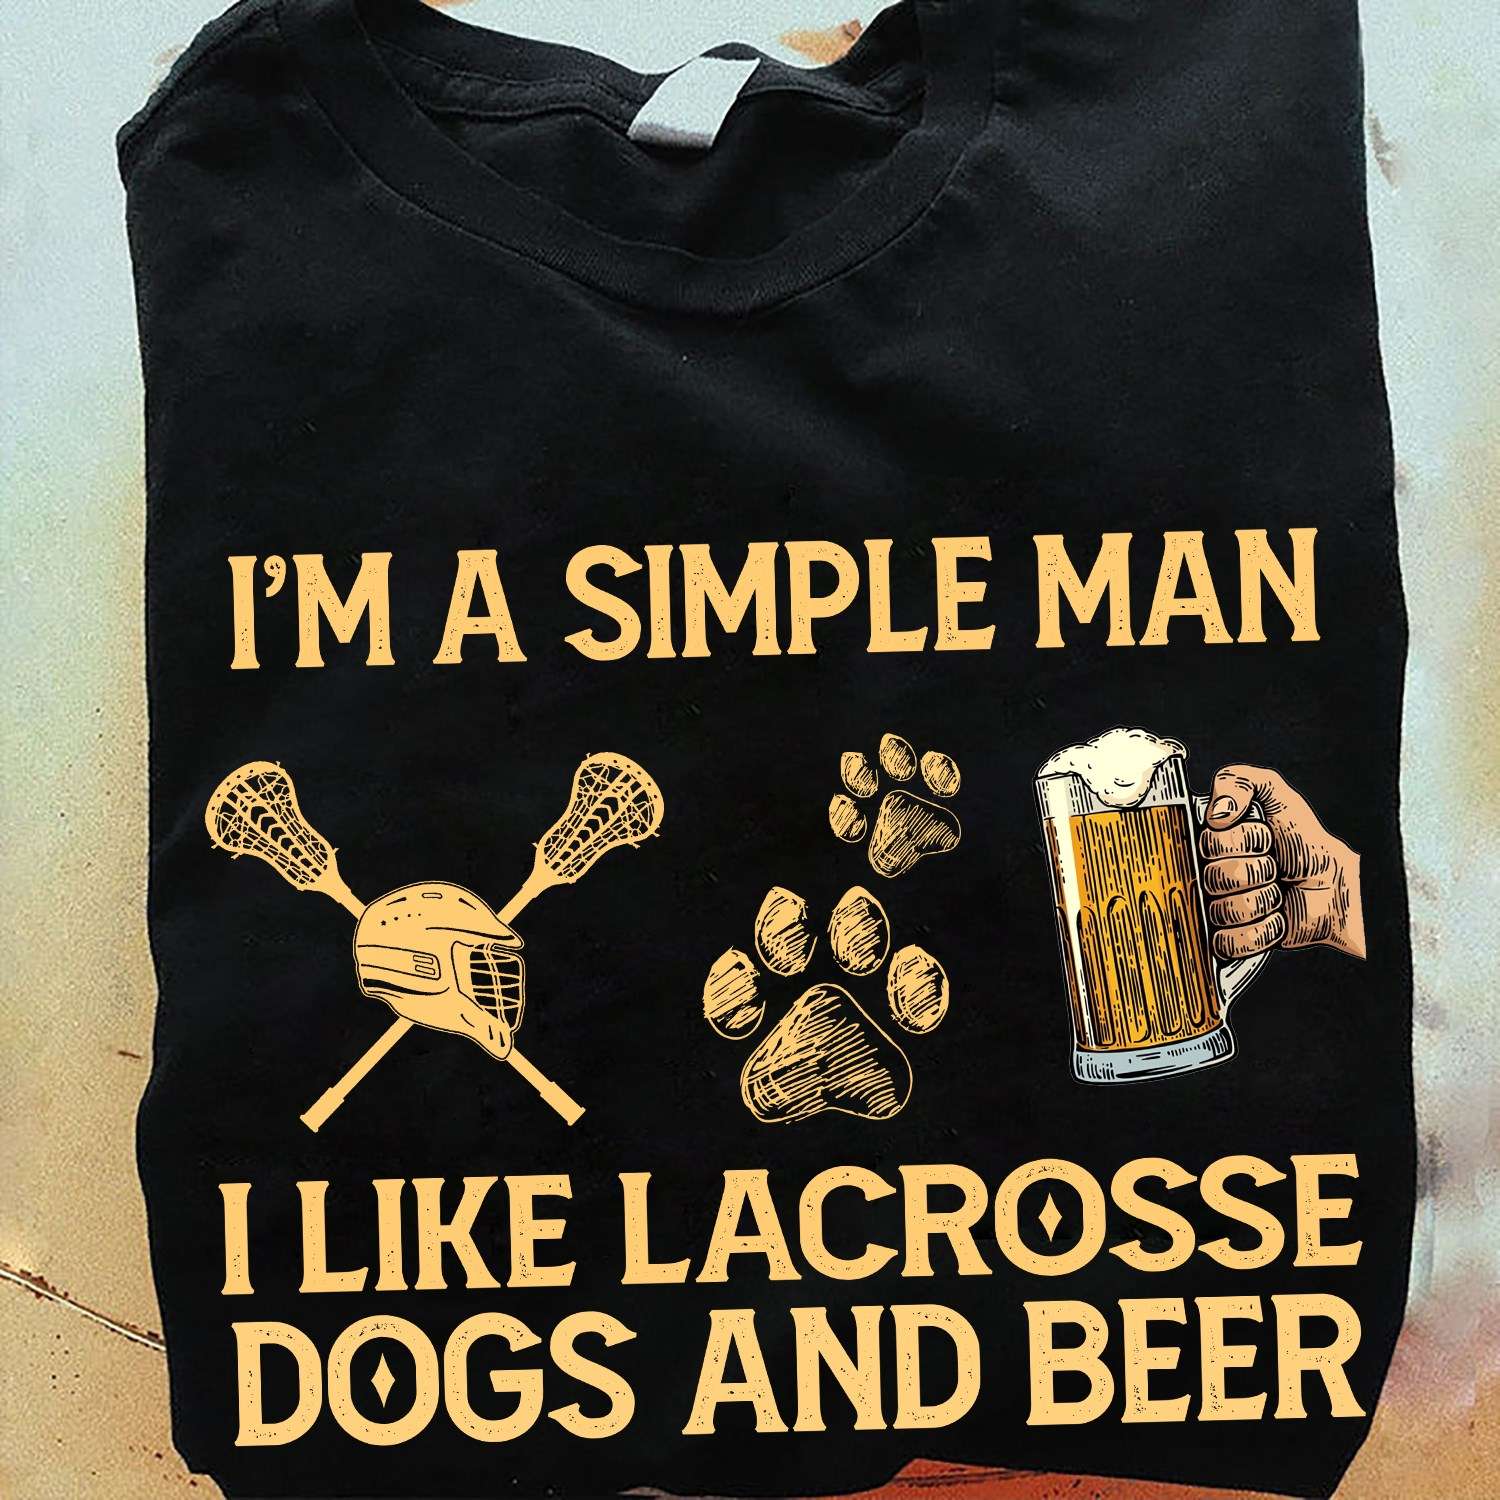 Lacrosse Dog Beer - I'm a simple man i like lacrosse dogs and beer